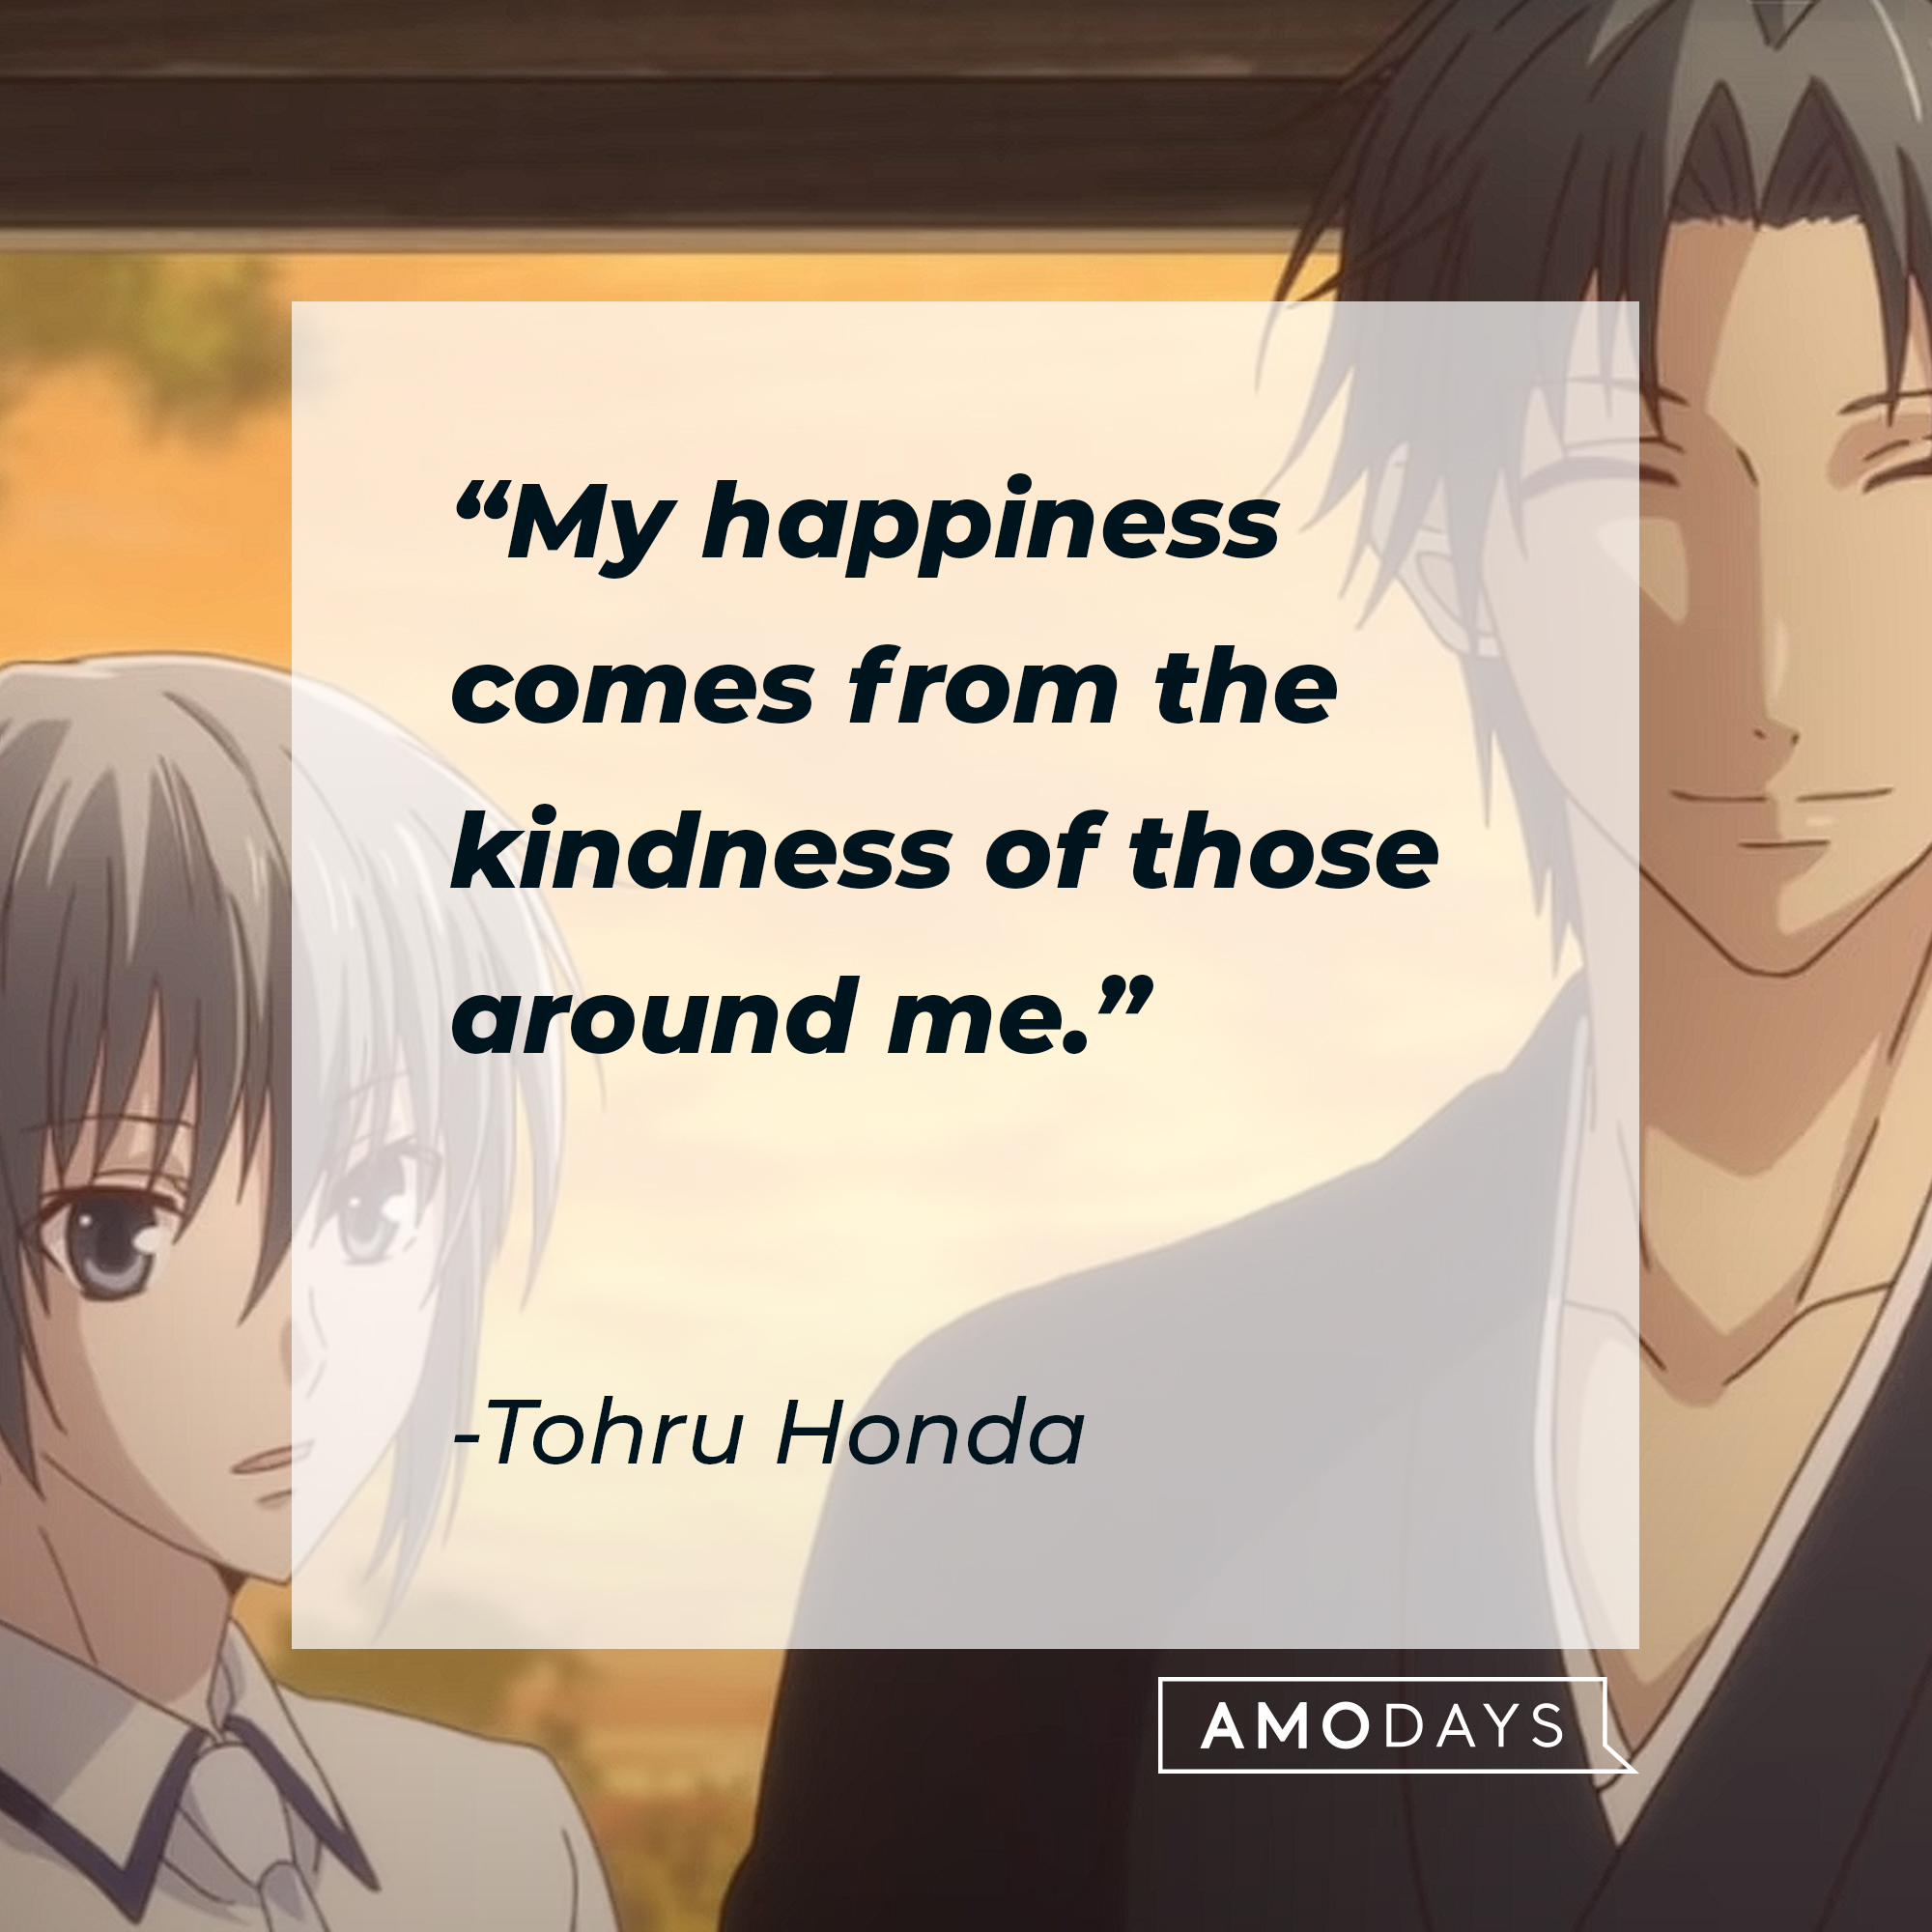 Tohru Honda's quote: "My happiness comes from the kindness of those around me." | Image: youtube.com/Crunchyroll Collection